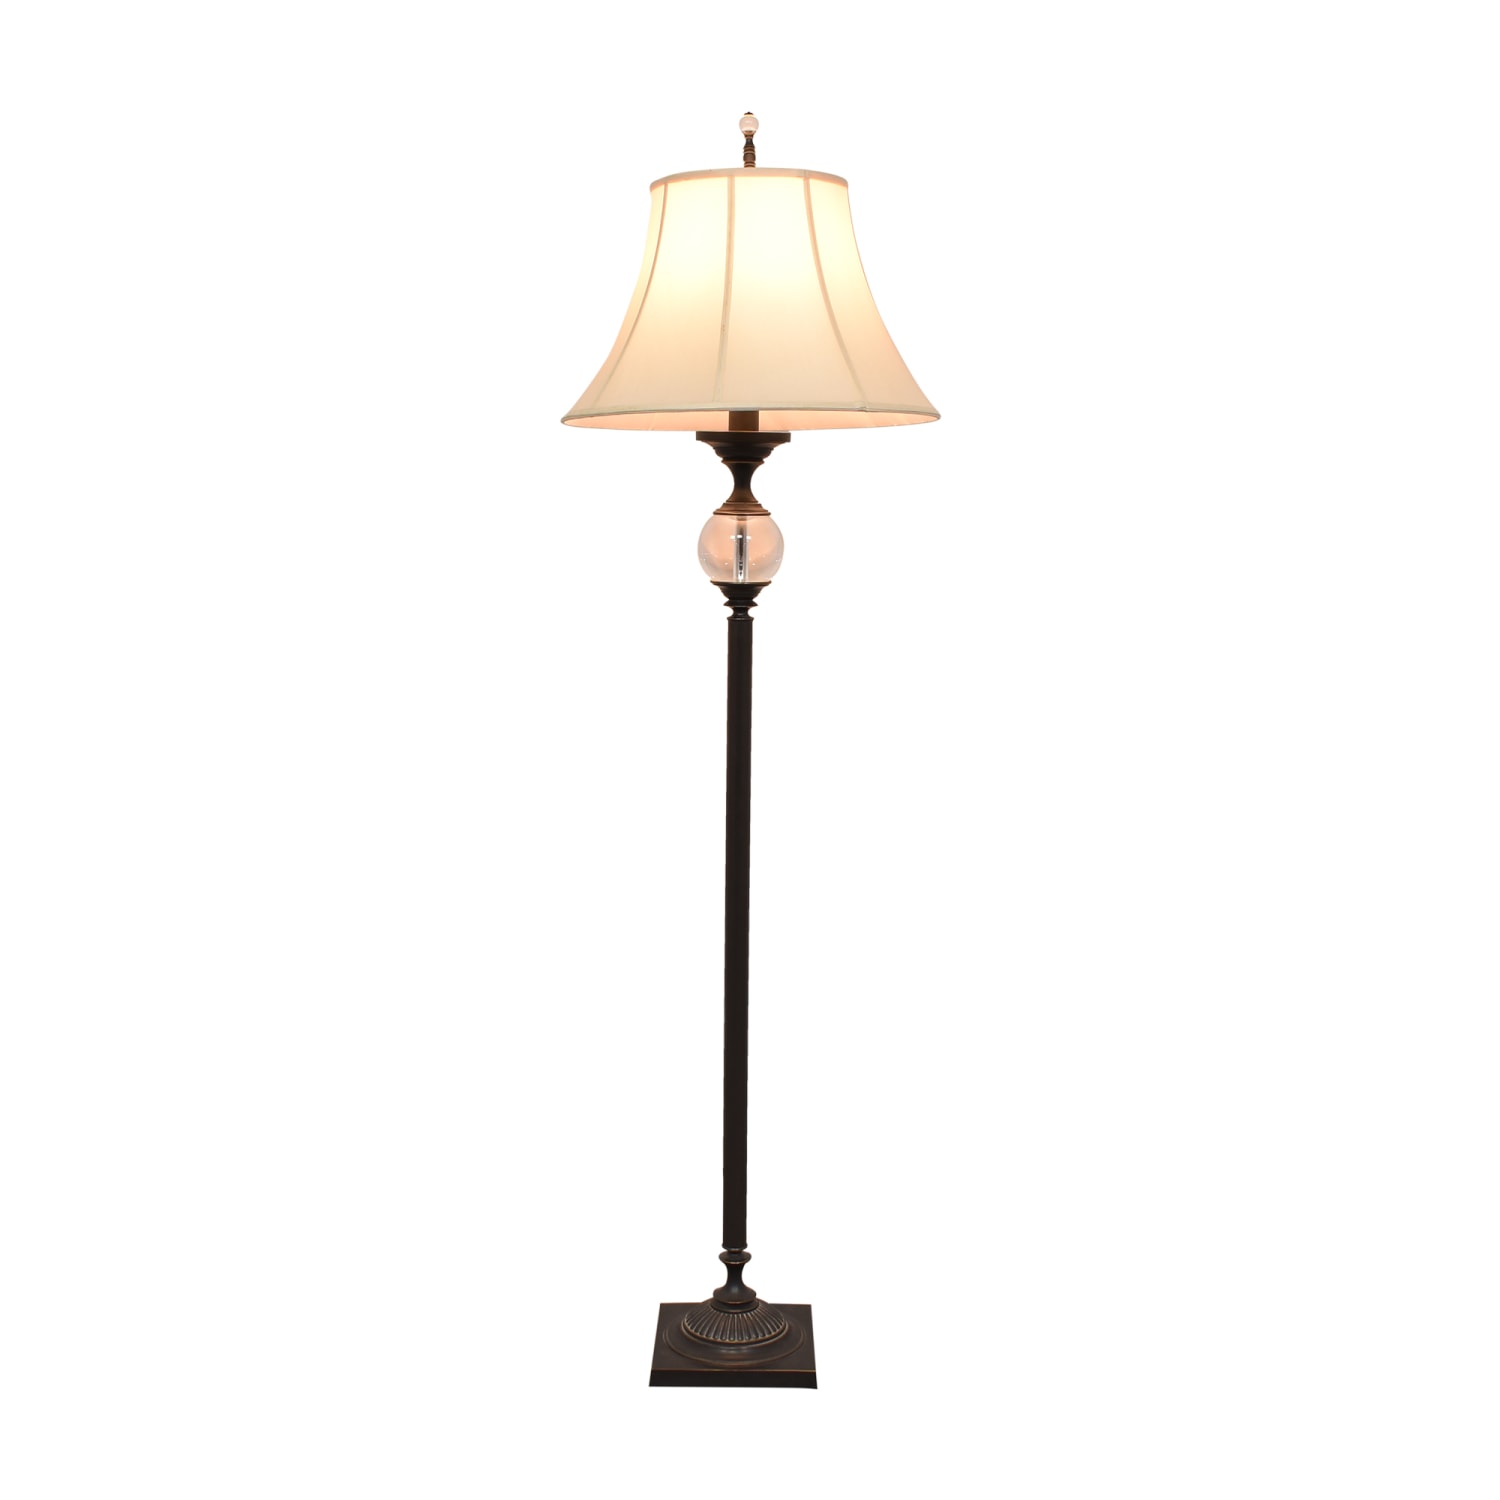 Restoration Hardware Brass Lamp – The Perfect Thing